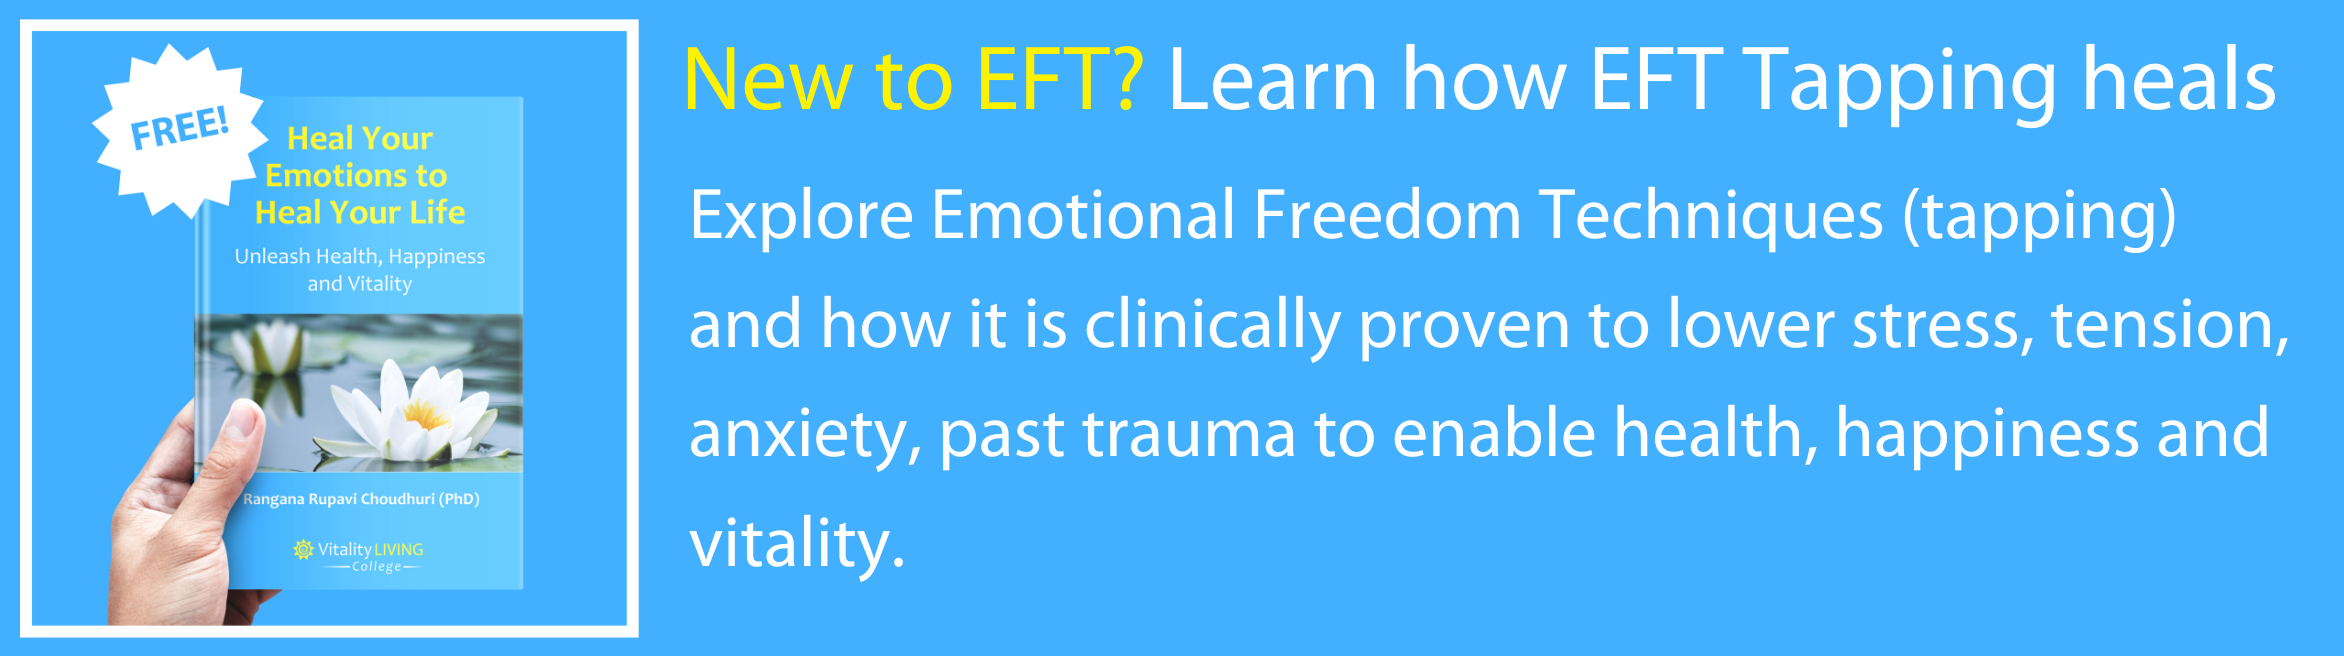 EFT for emotional reaction and physical pain